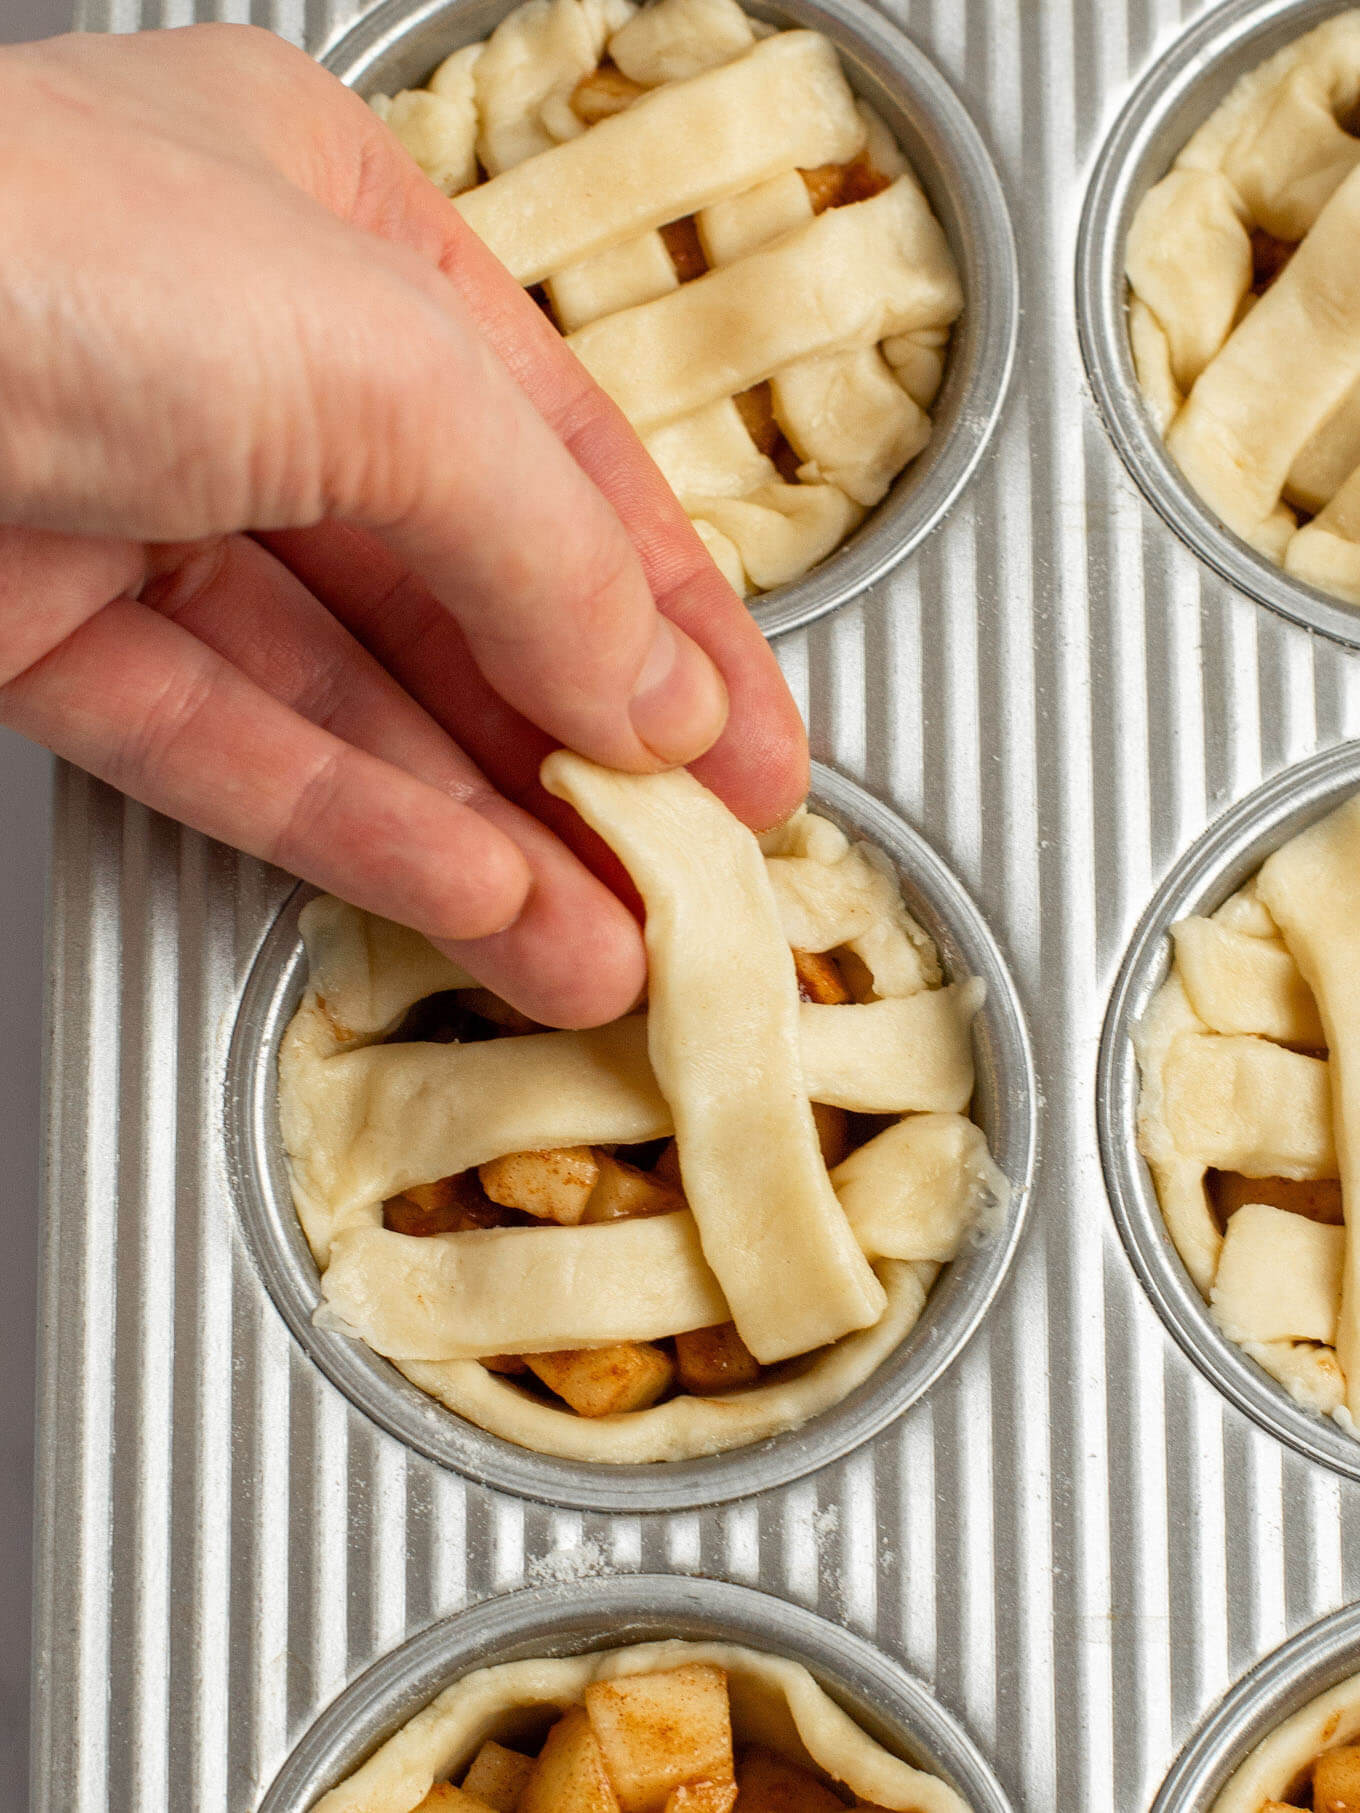 An angled view of small strips of pie crust being placed on top of the pies to create a lattice pie crust.